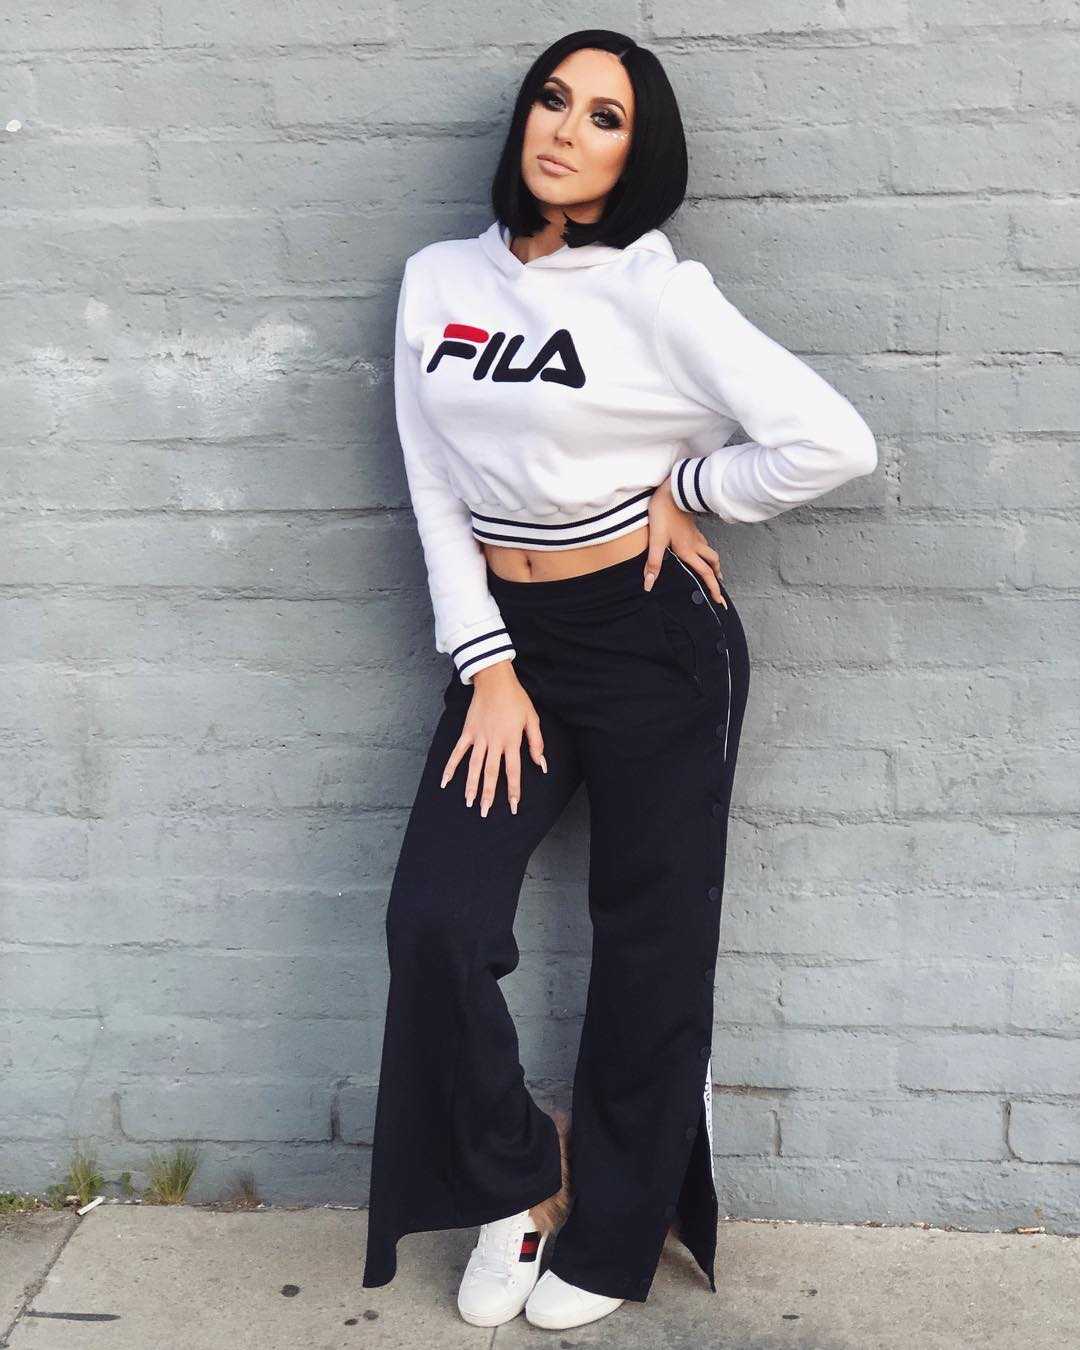 51 Hottest Jaclyn Hill Big Butt Pictures That Are Basically Flawless 351